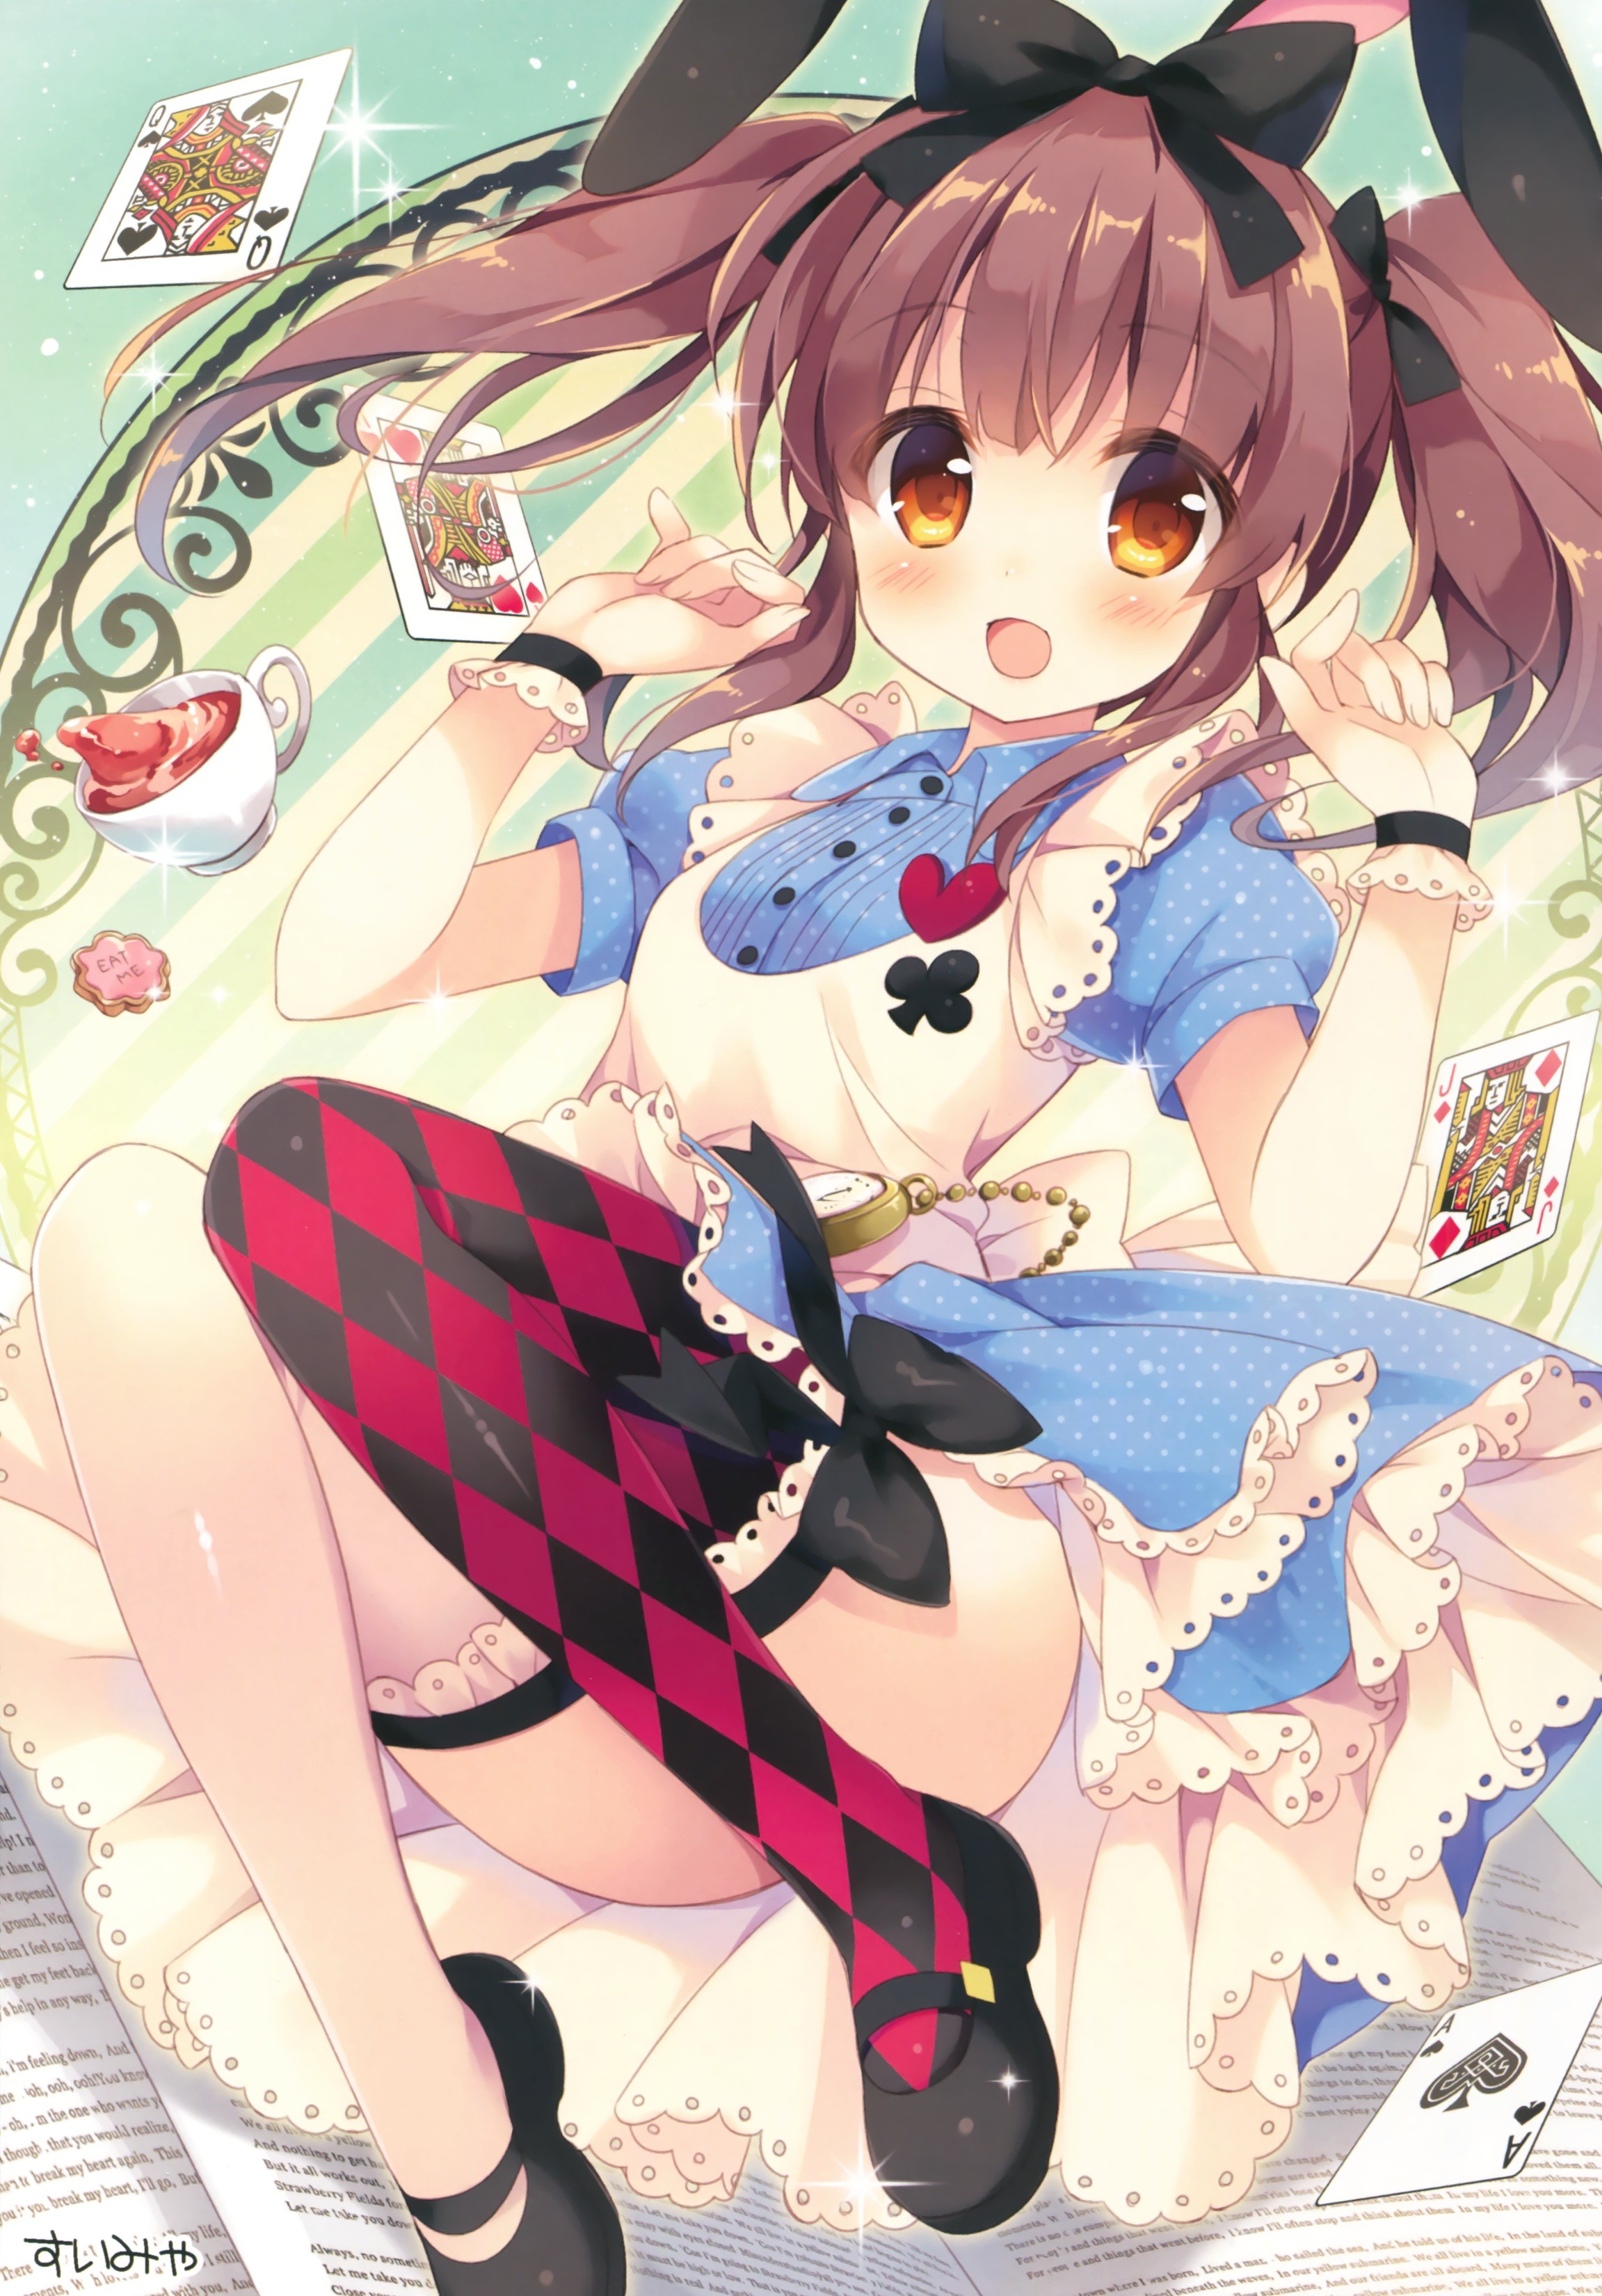 Anime 2303x3300 anime anime girls Alice in Wonderland THE iDOLM@STER THE iDOLM@STER: Cinderella Girls Ogata Chieri animal ears bunny ears dress long hair orange eyes cards thighs legs fantasy art playing cards stockings open mouth cup fantasy girl